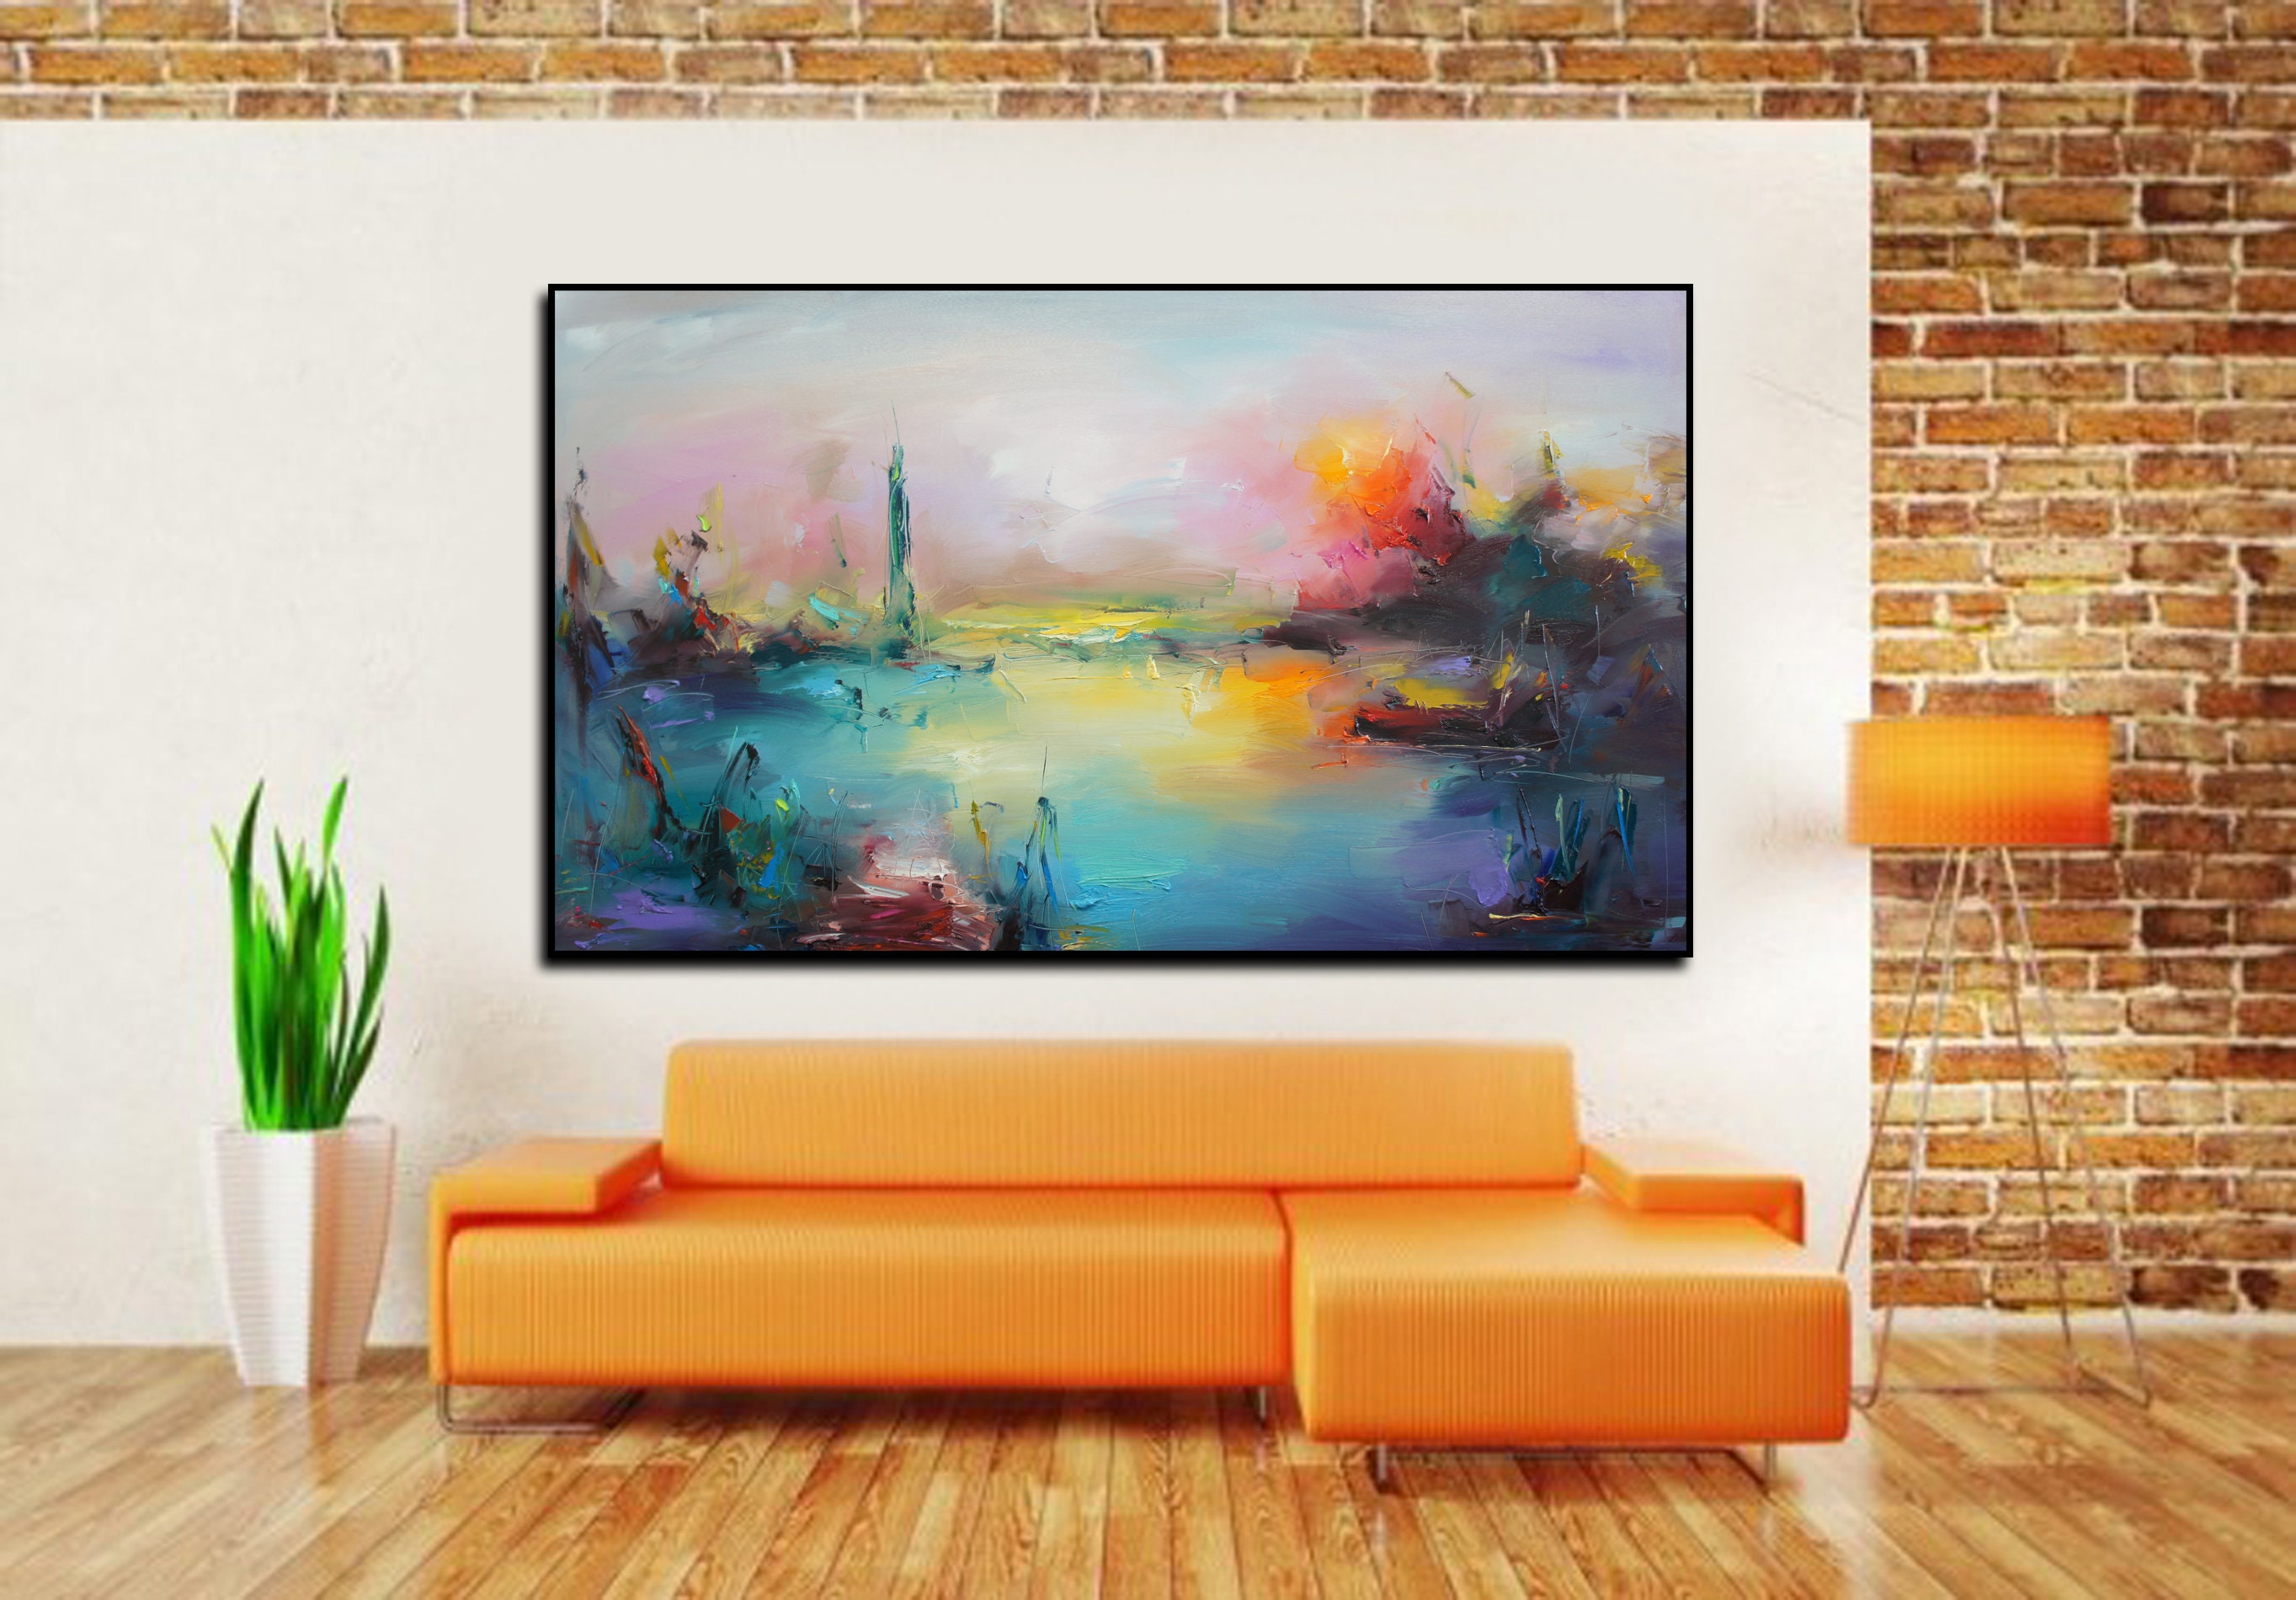 Acrylic Painting, Oil Large Painting, Canvas Painting, Original Abstract,  Wall art decor, Abstract canvases, Art Canvas Oil, Oil Large Art [pat132] -  $197.00 : Handmade Large Abstract Painting On Canvas